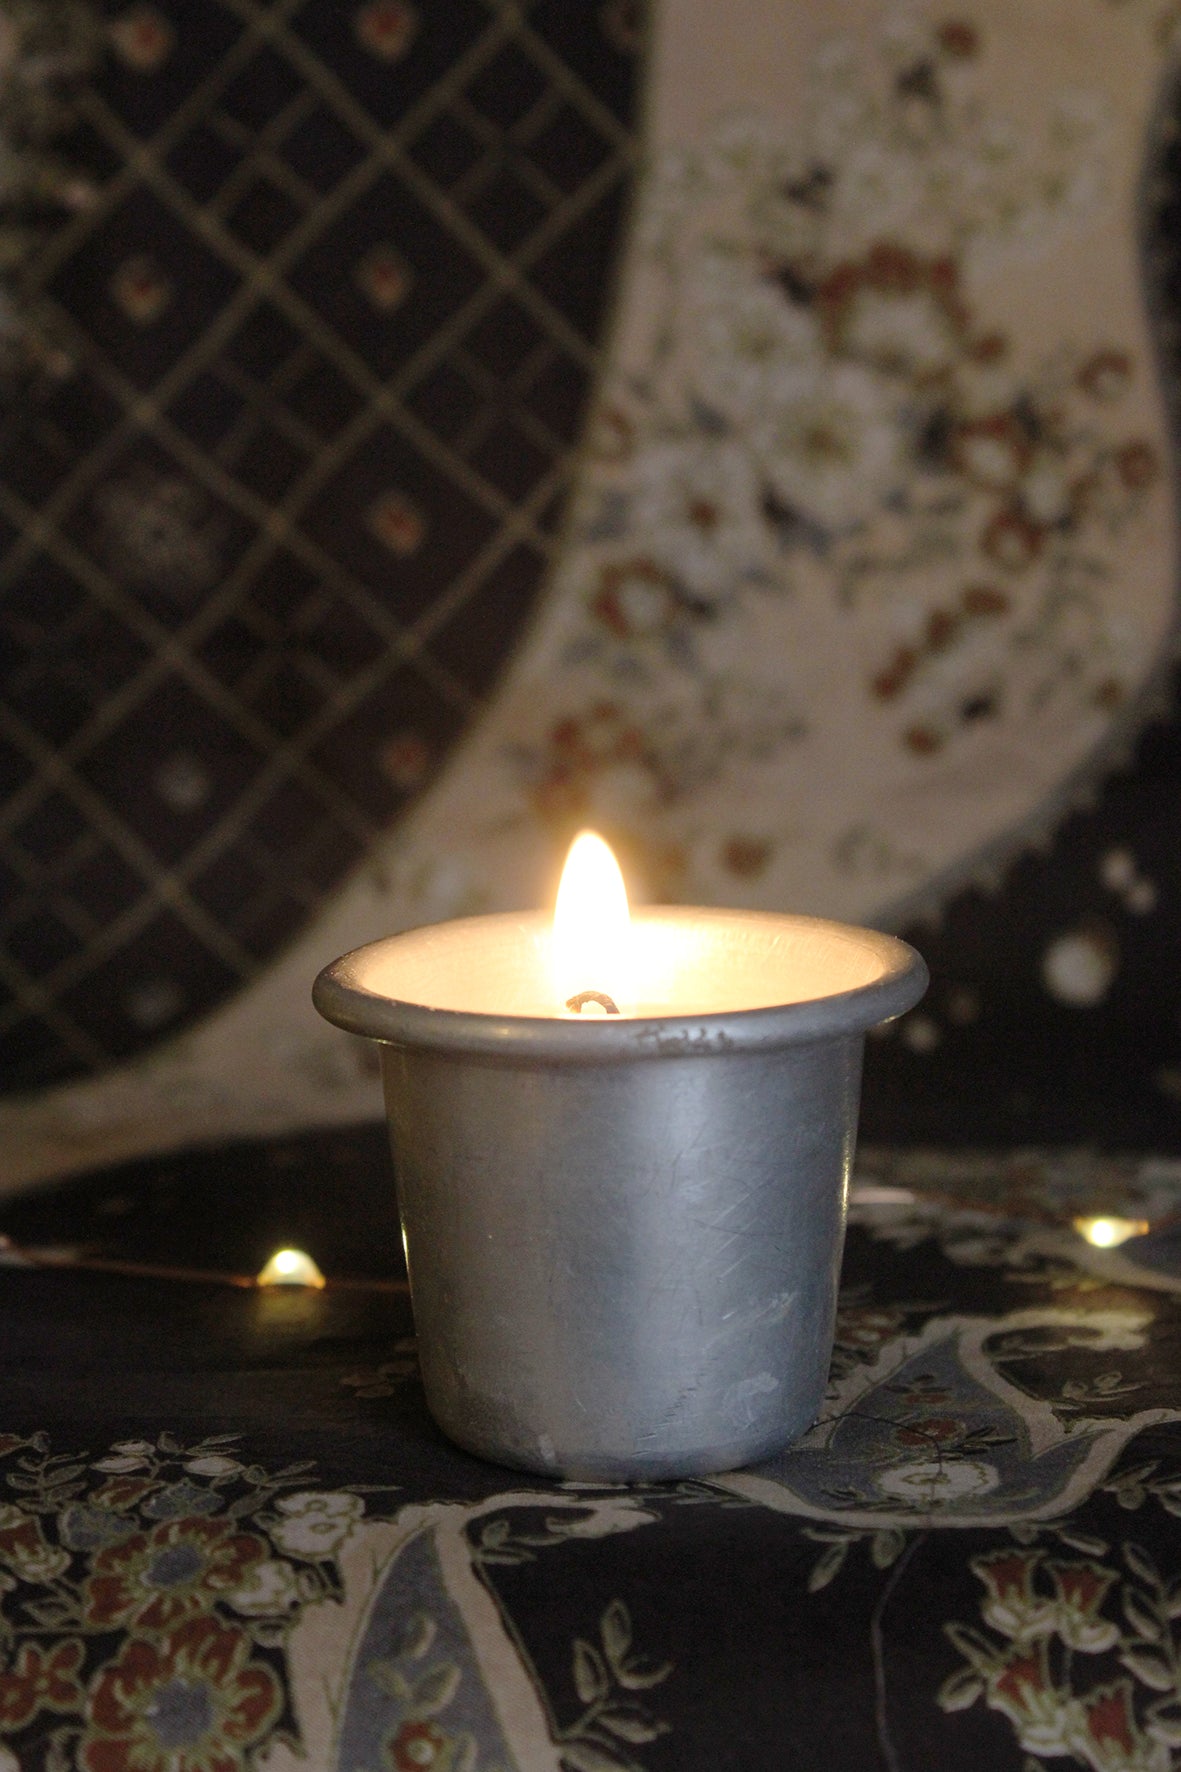 Evening Light - Sweet Old French Patisserie Pot Candle